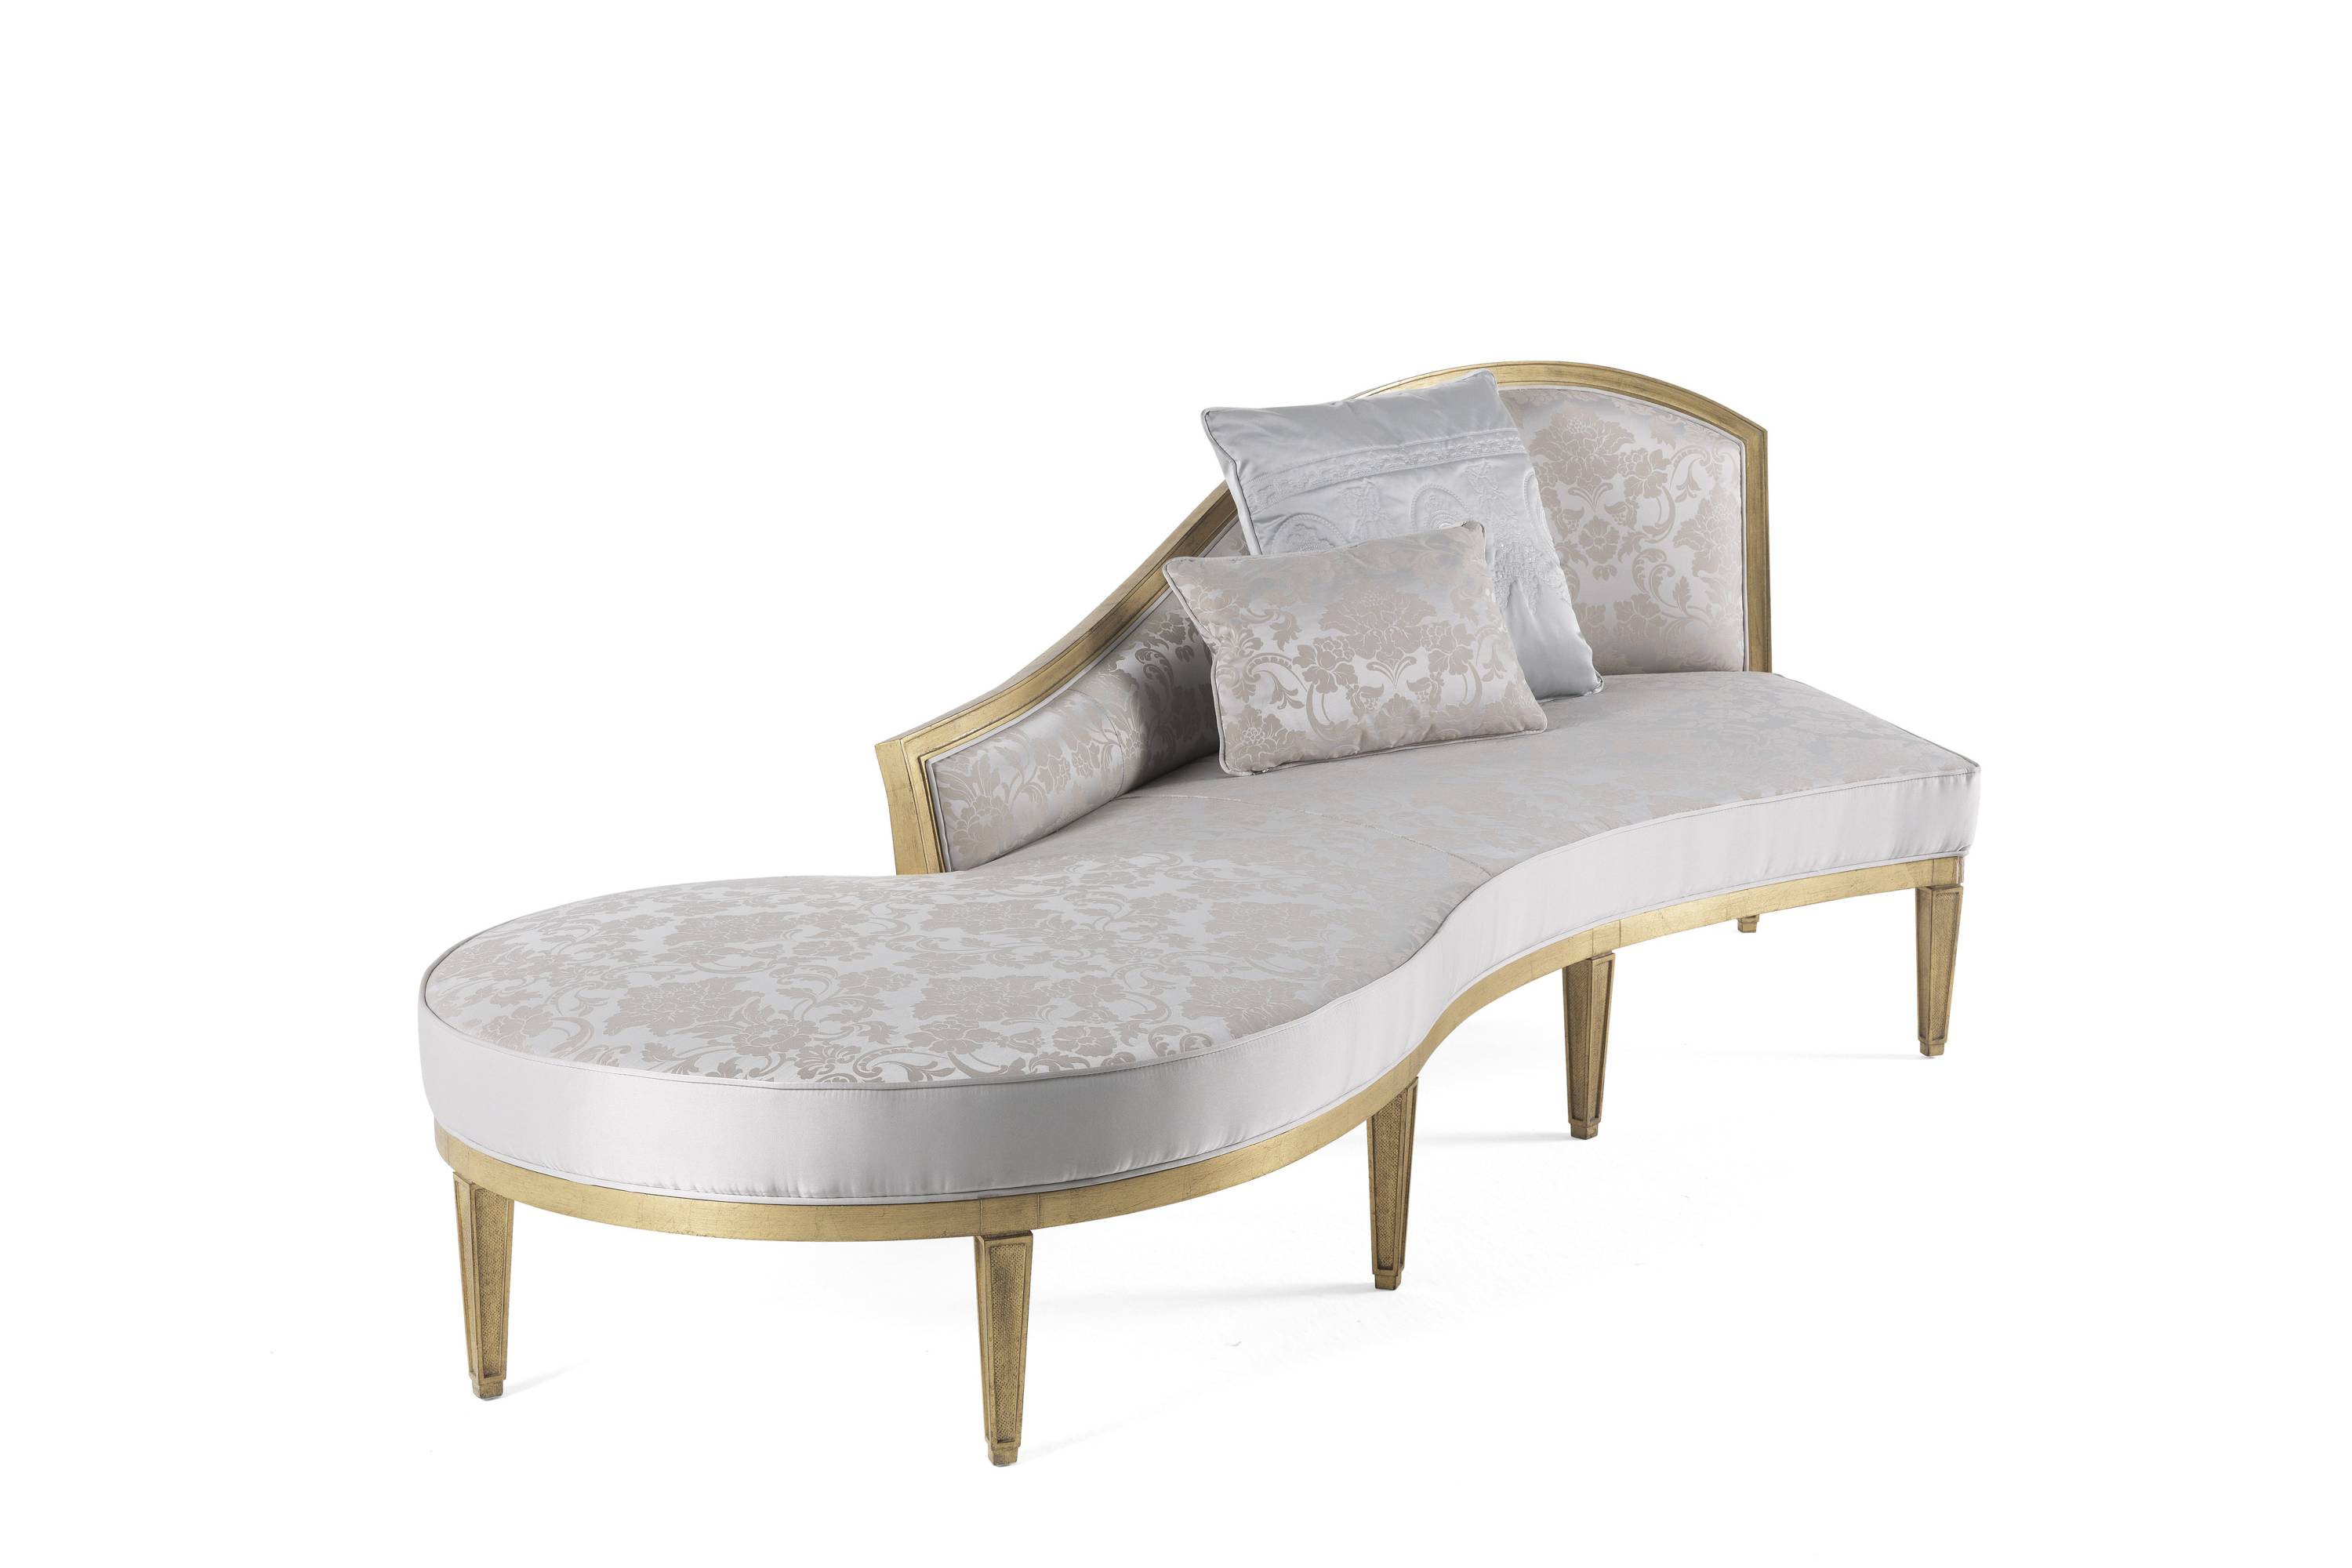 MADINE chaise longue - Discover the elegance of luxury Oro Bianco collection by Jumbo collection